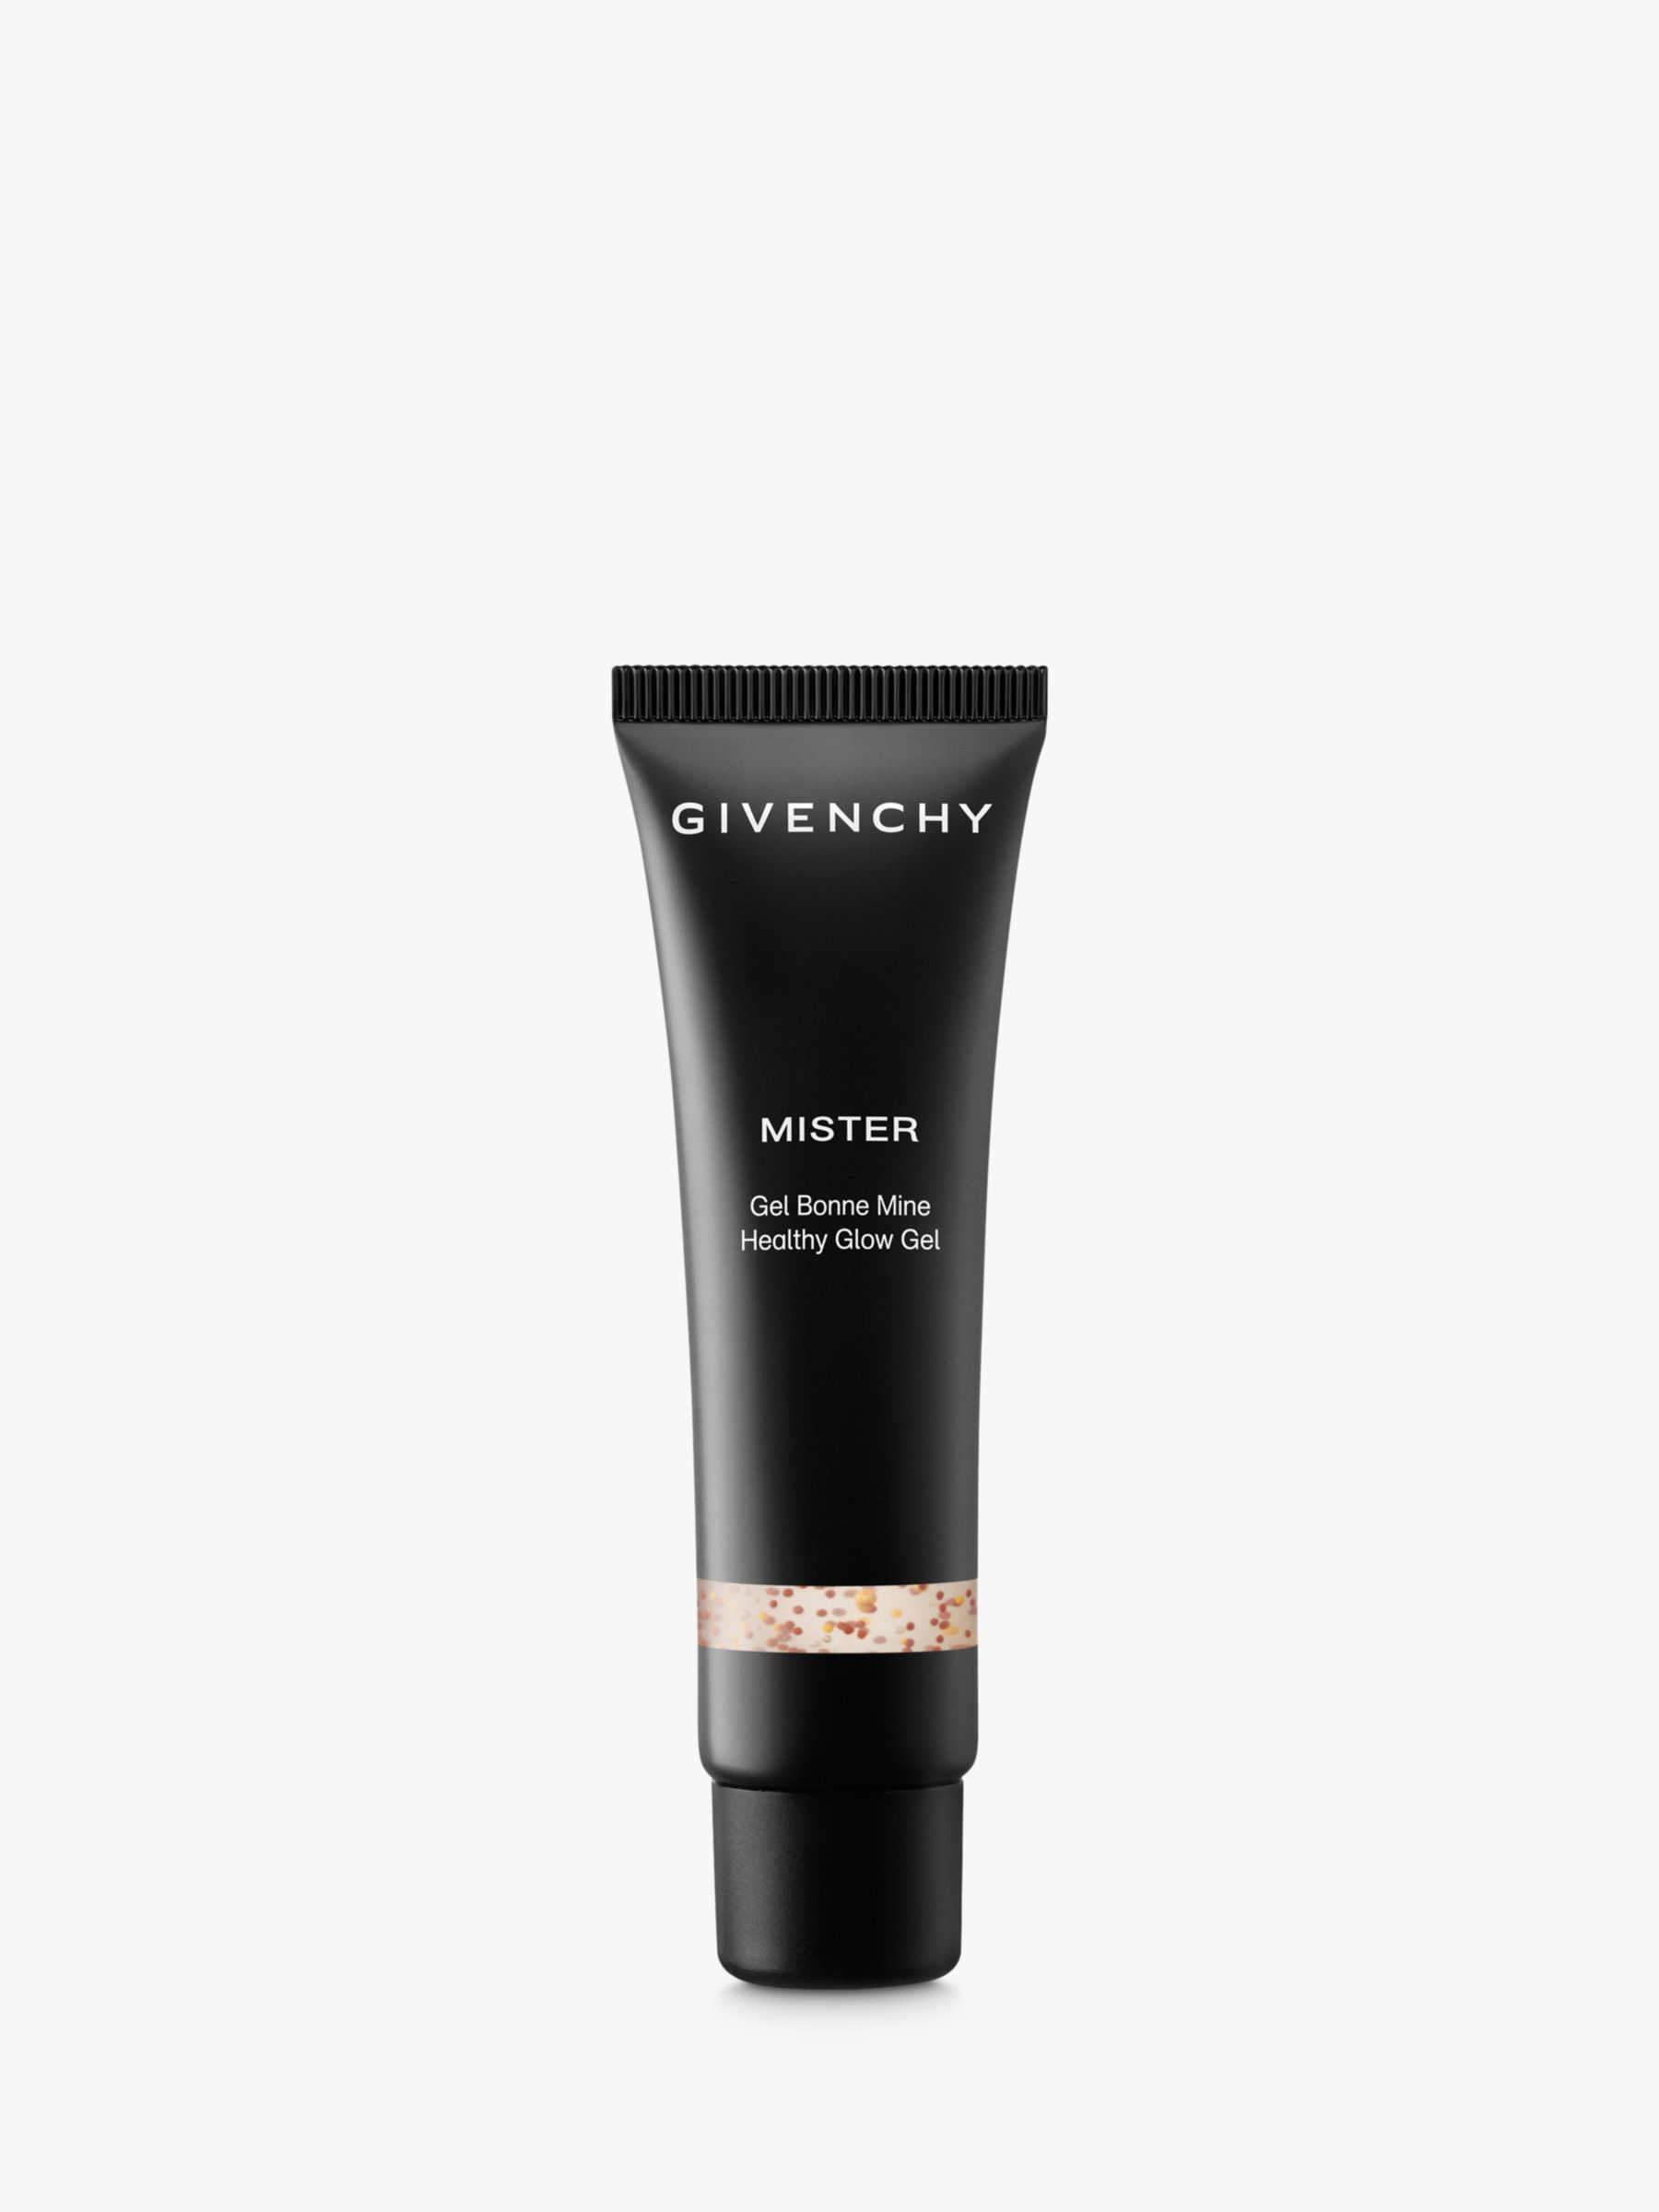 Givenchy Mister Healthy Glow Gel, 00 Universal Tan 1